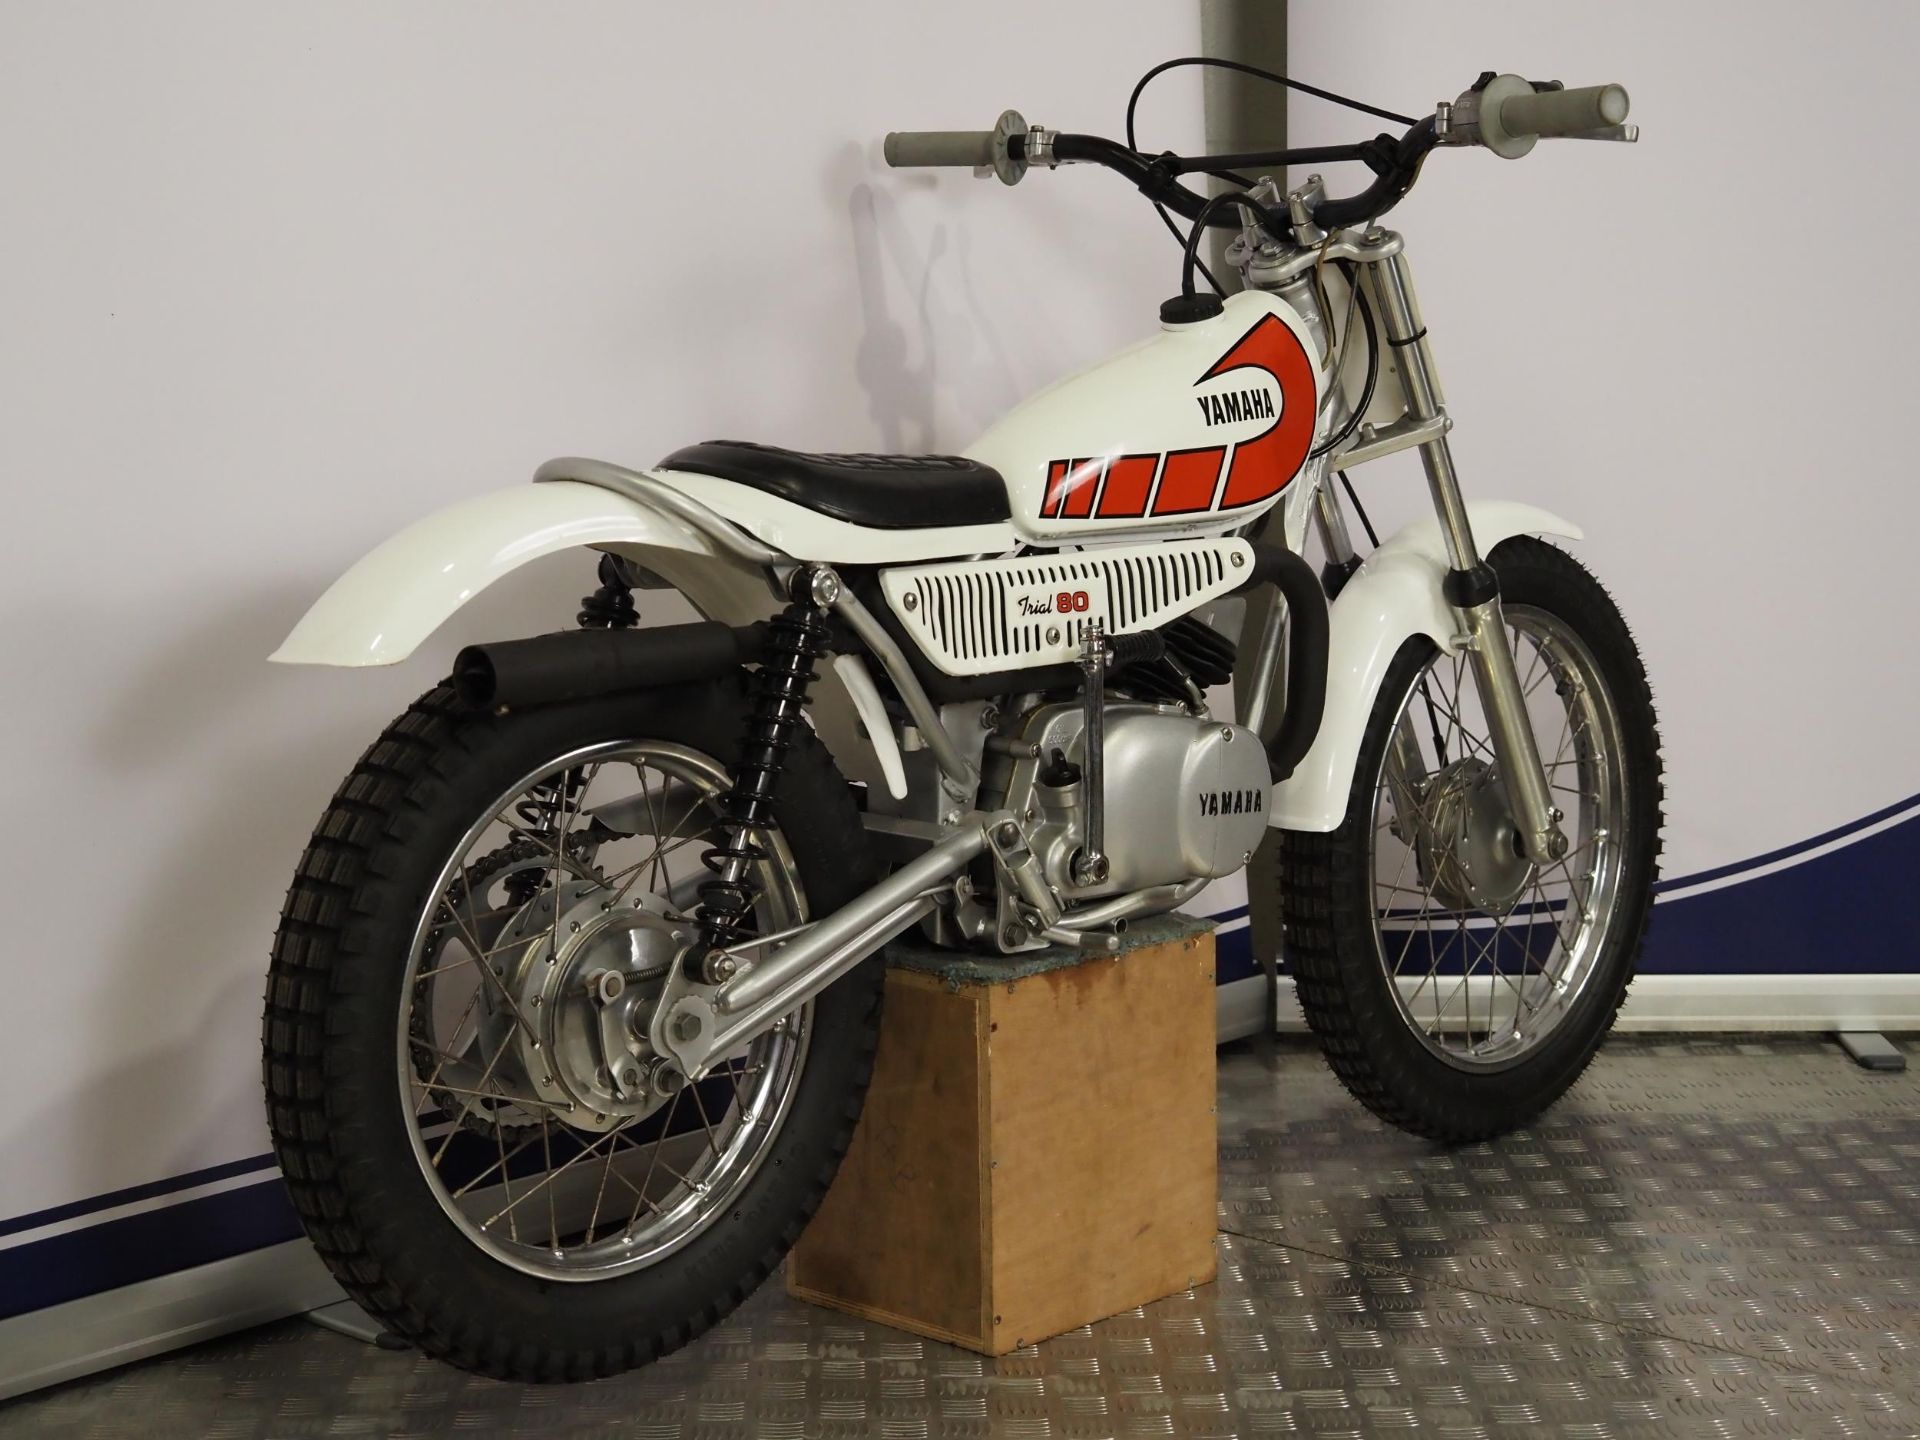 Yamaha TY 80 trials bike. Frame No. 451-110027 Engine No. 451-110027 Runs and rides but will need - Image 4 of 7